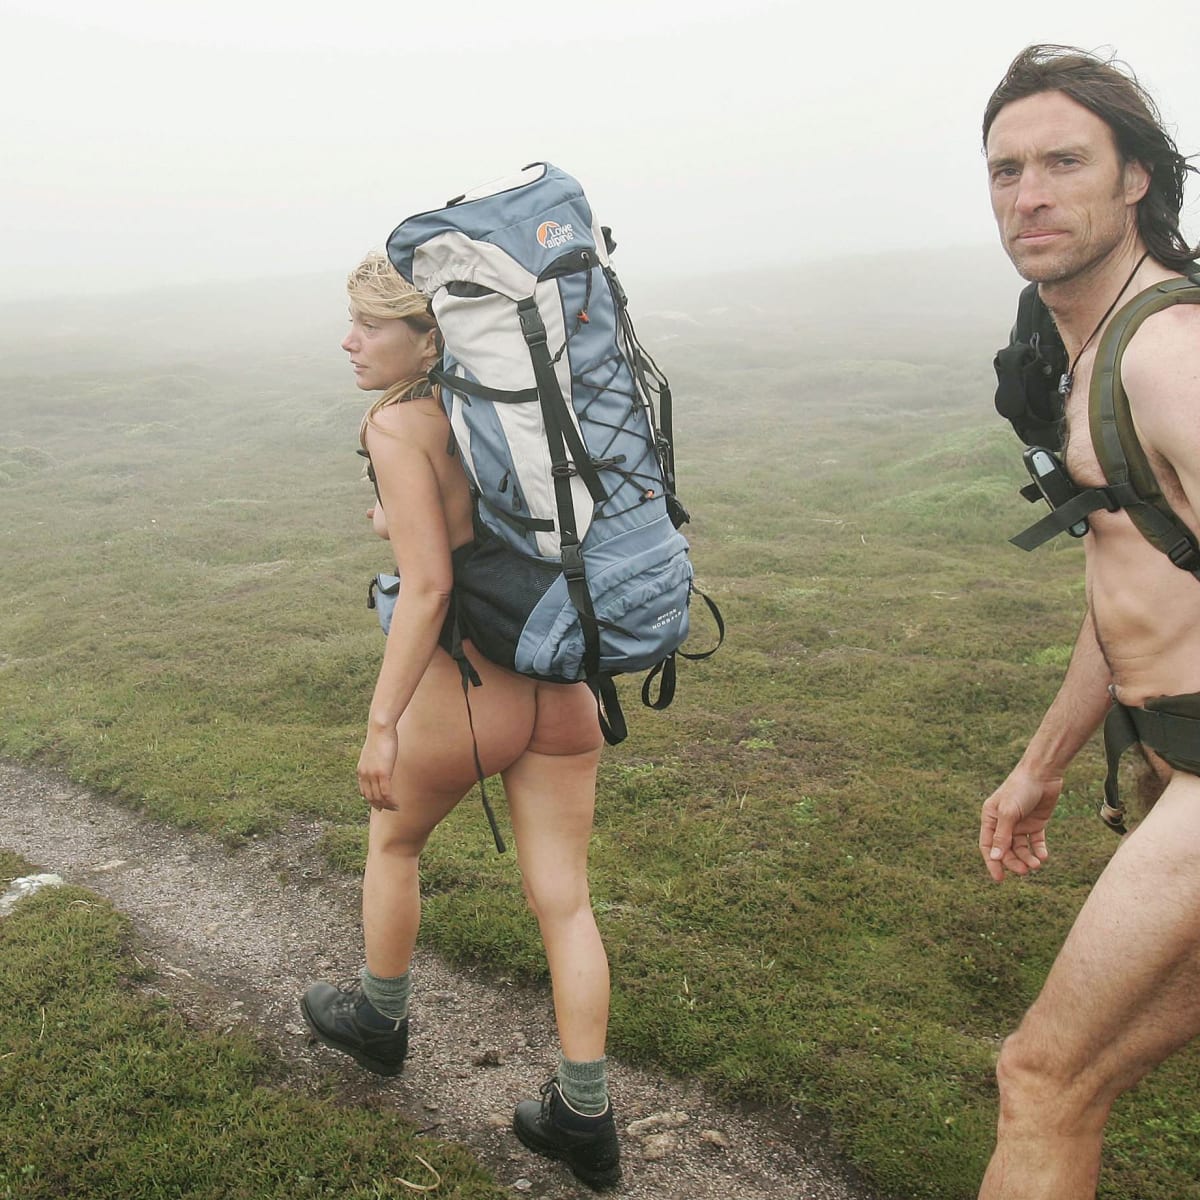 Happy Nude Hiking Day! Heres How to (Legally) Make the Most of It image photo image